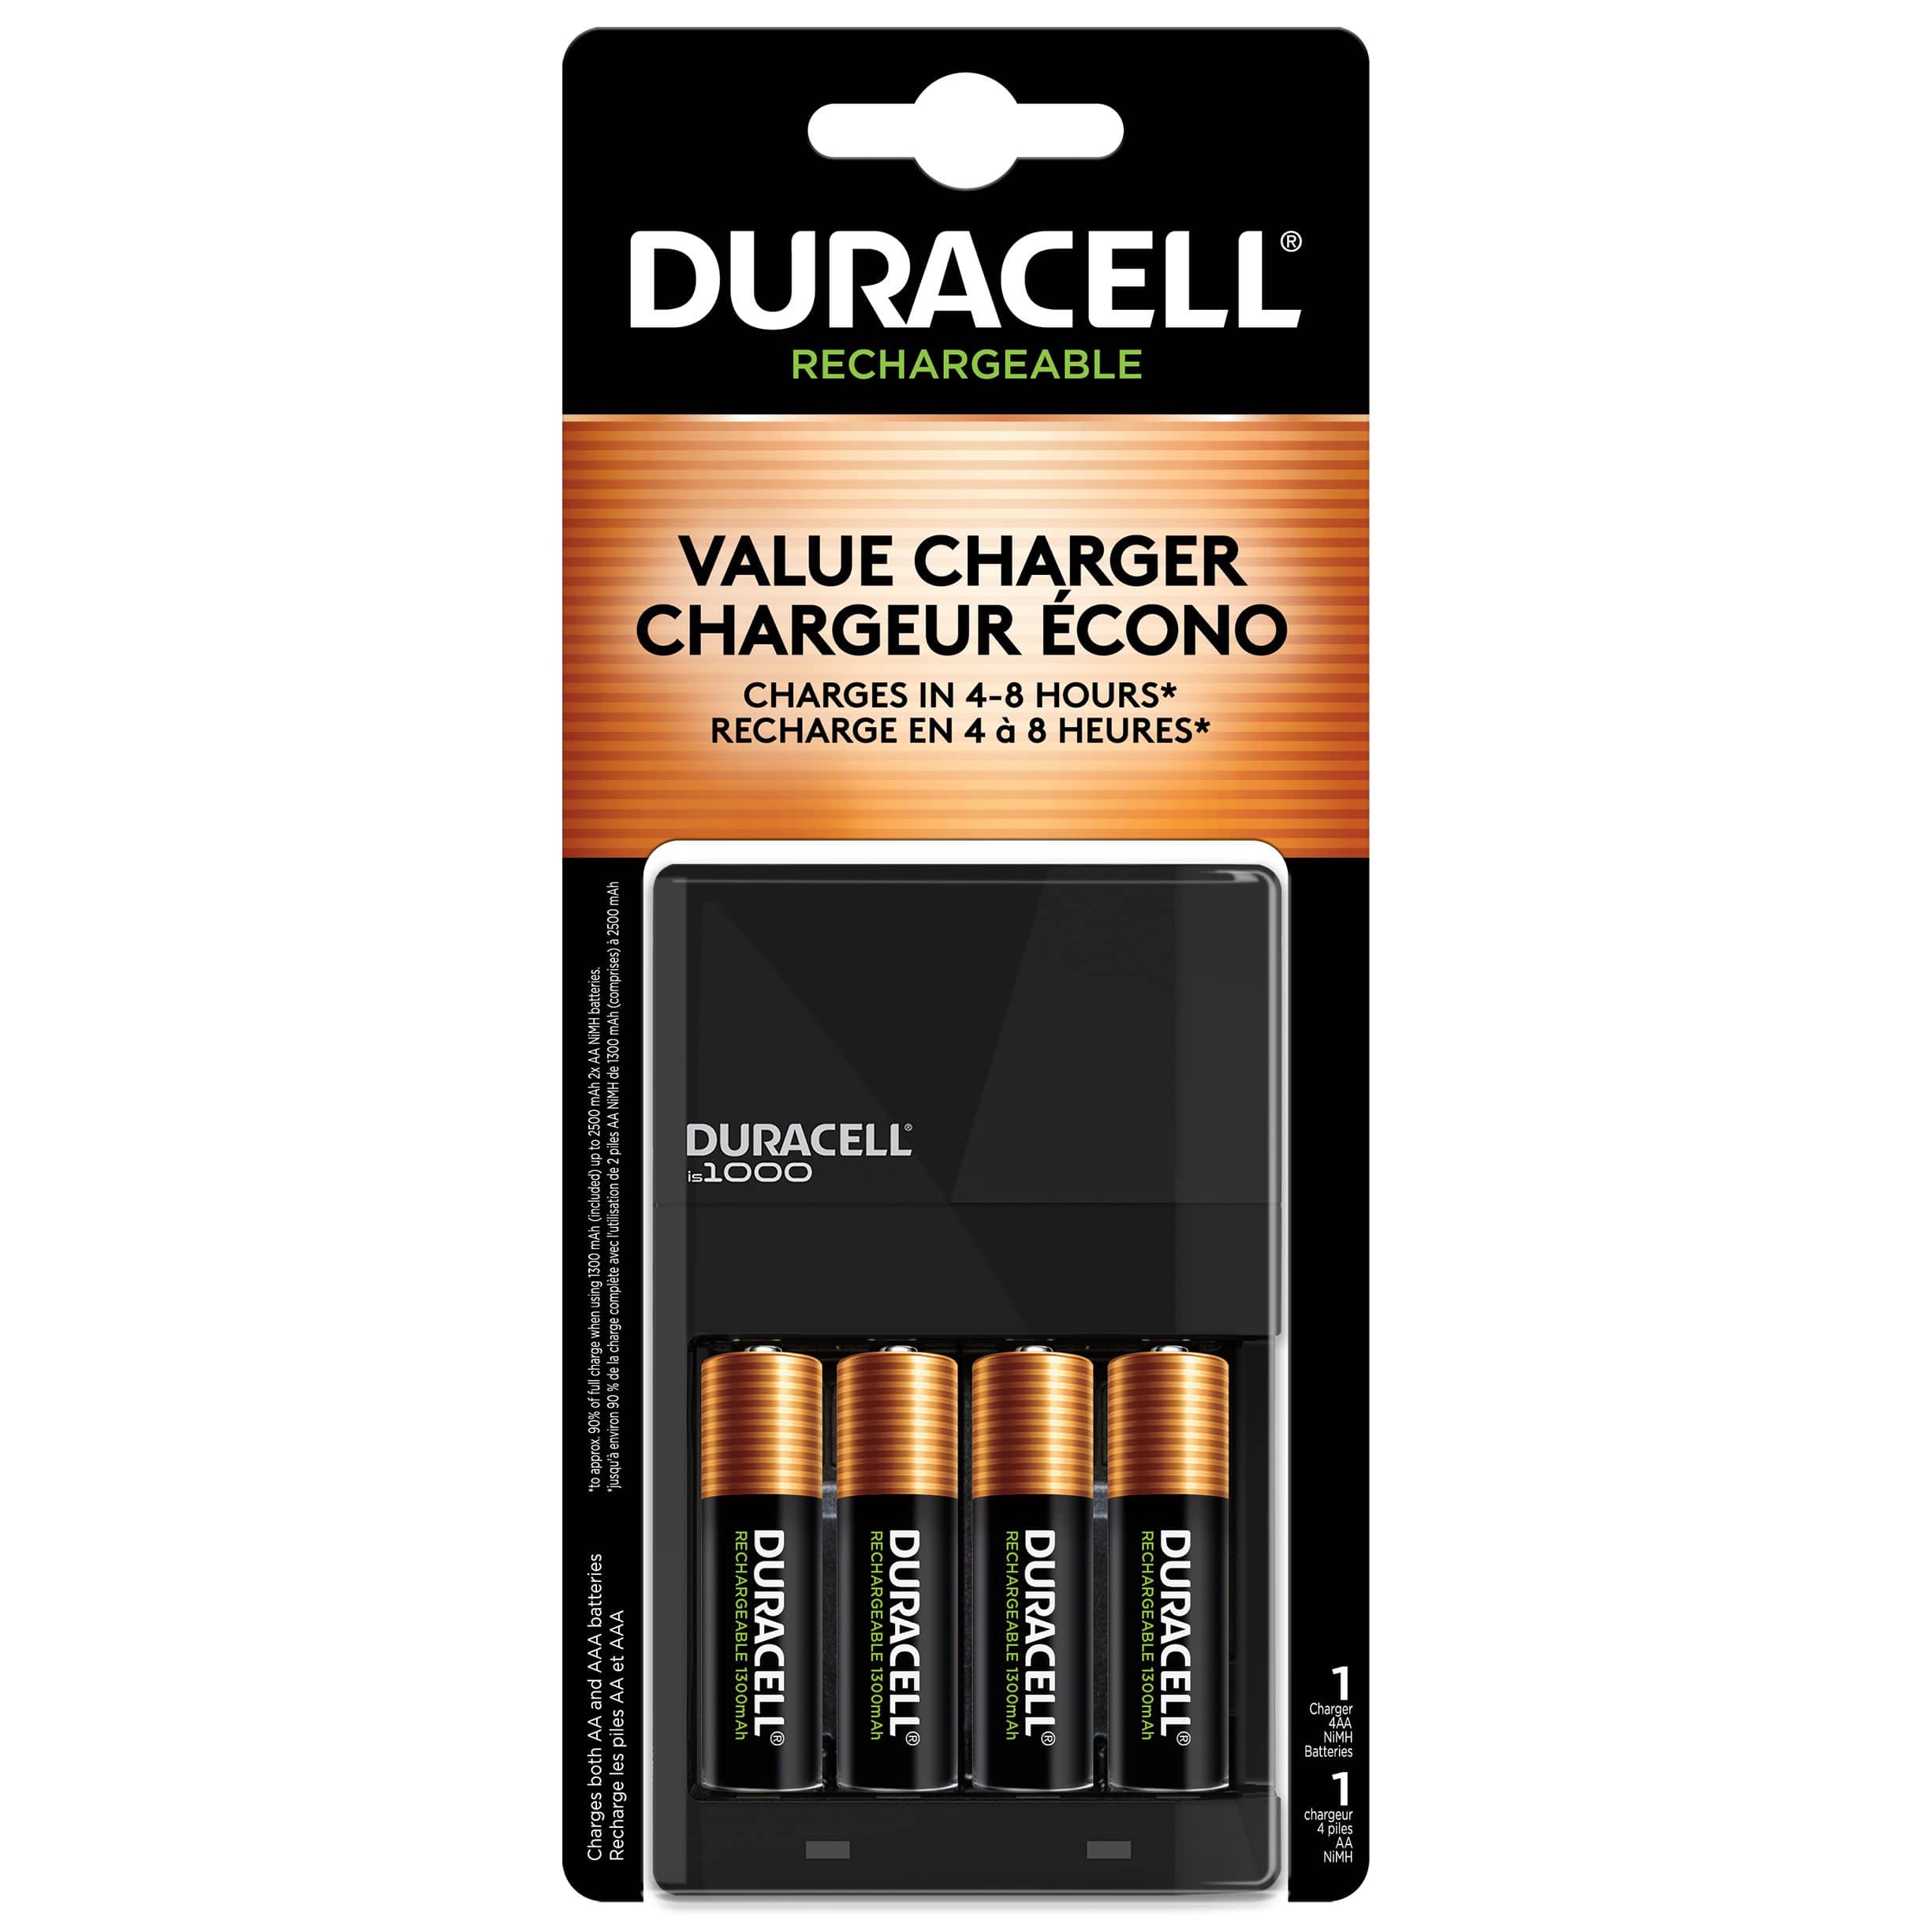 Chargeur Piles Rechargeables AA et AAA - 4 Piles AA Minh Rechargeables  incluses, 100% PEAKPOWER, Chargeur Rapide avec USB 4 Piles